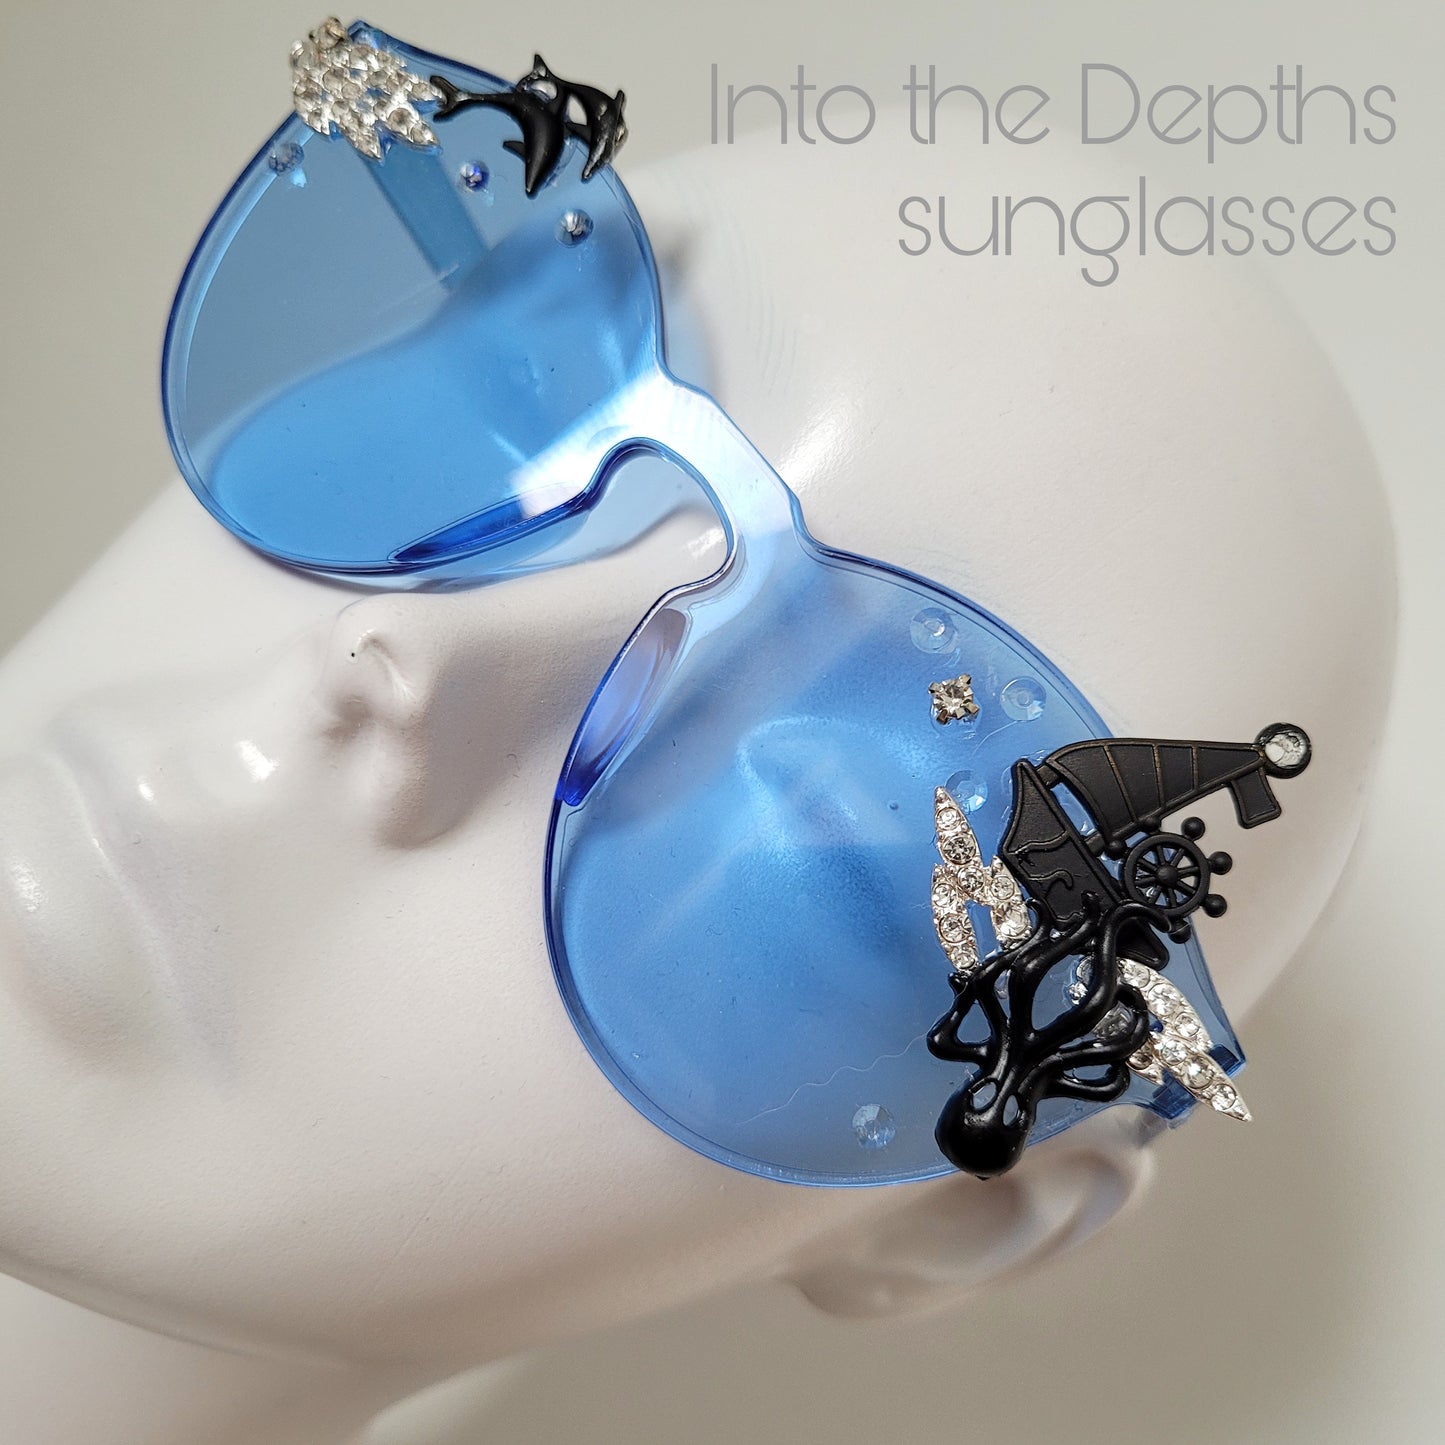 Plexi Visions collection: The Into the Dephts sunglasses with kraken, waves and dolphins